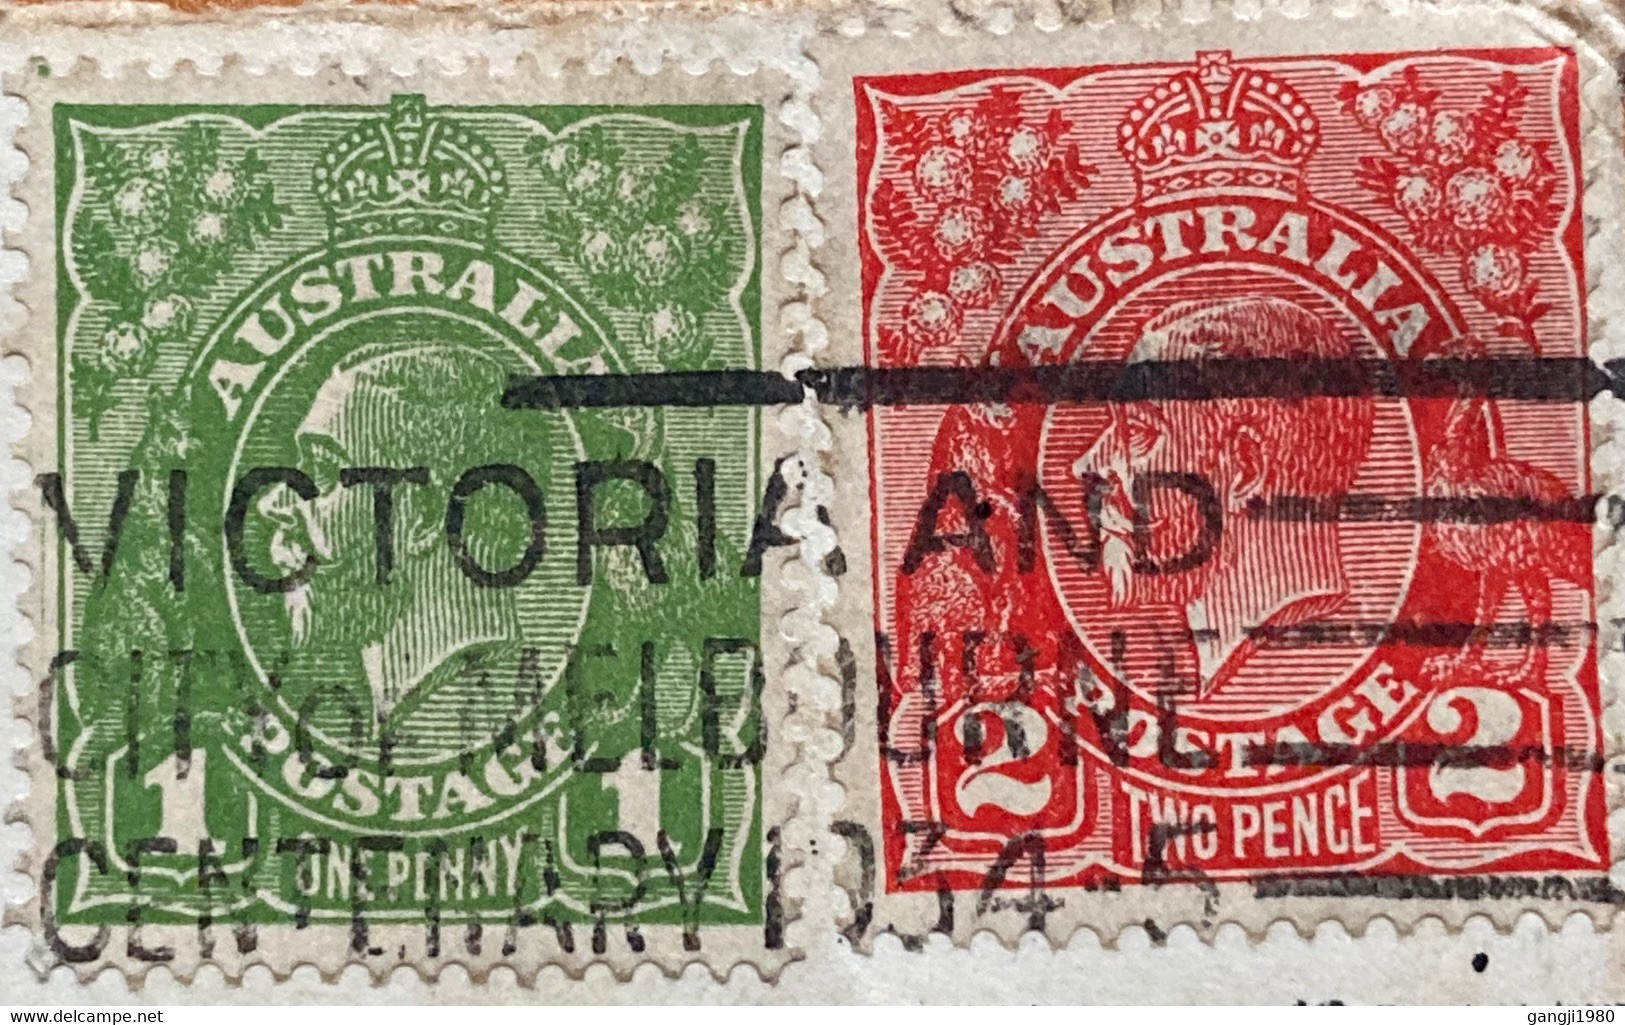 AUSTRALIA 1934, KING GEORGE 2 STAMPS,SLOGAN VICTORIA & CITY MELBOURNE CENTENARY-1934 WITH SPECIAL PREPRINTED USED COVER - Lettres & Documents